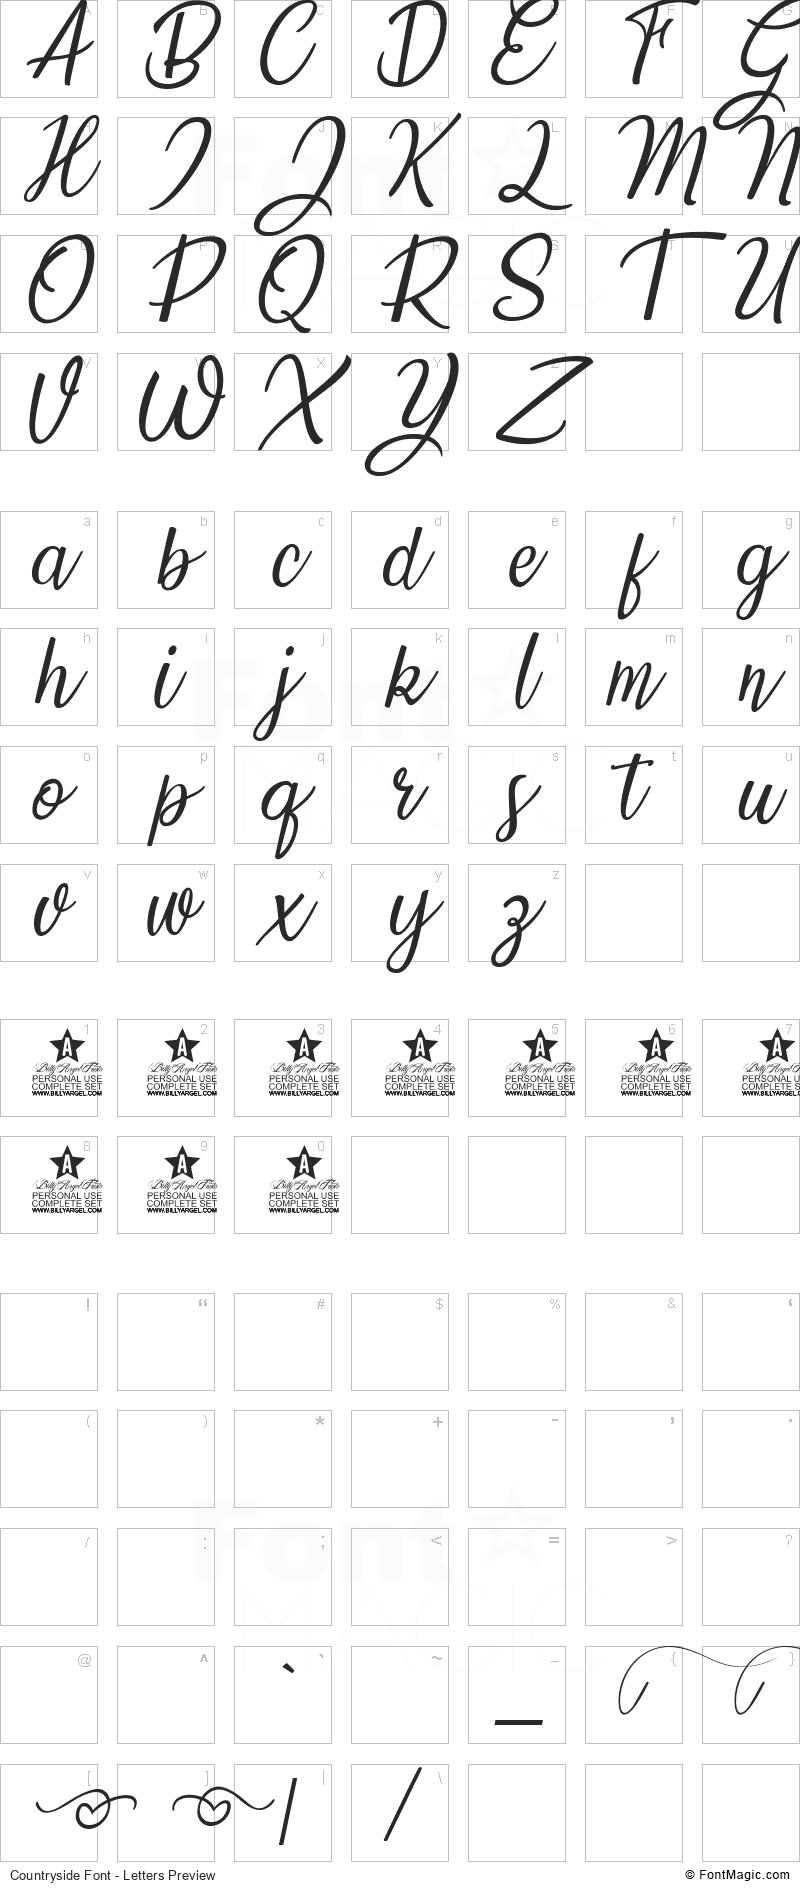 Countryside Font - All Latters Preview Chart